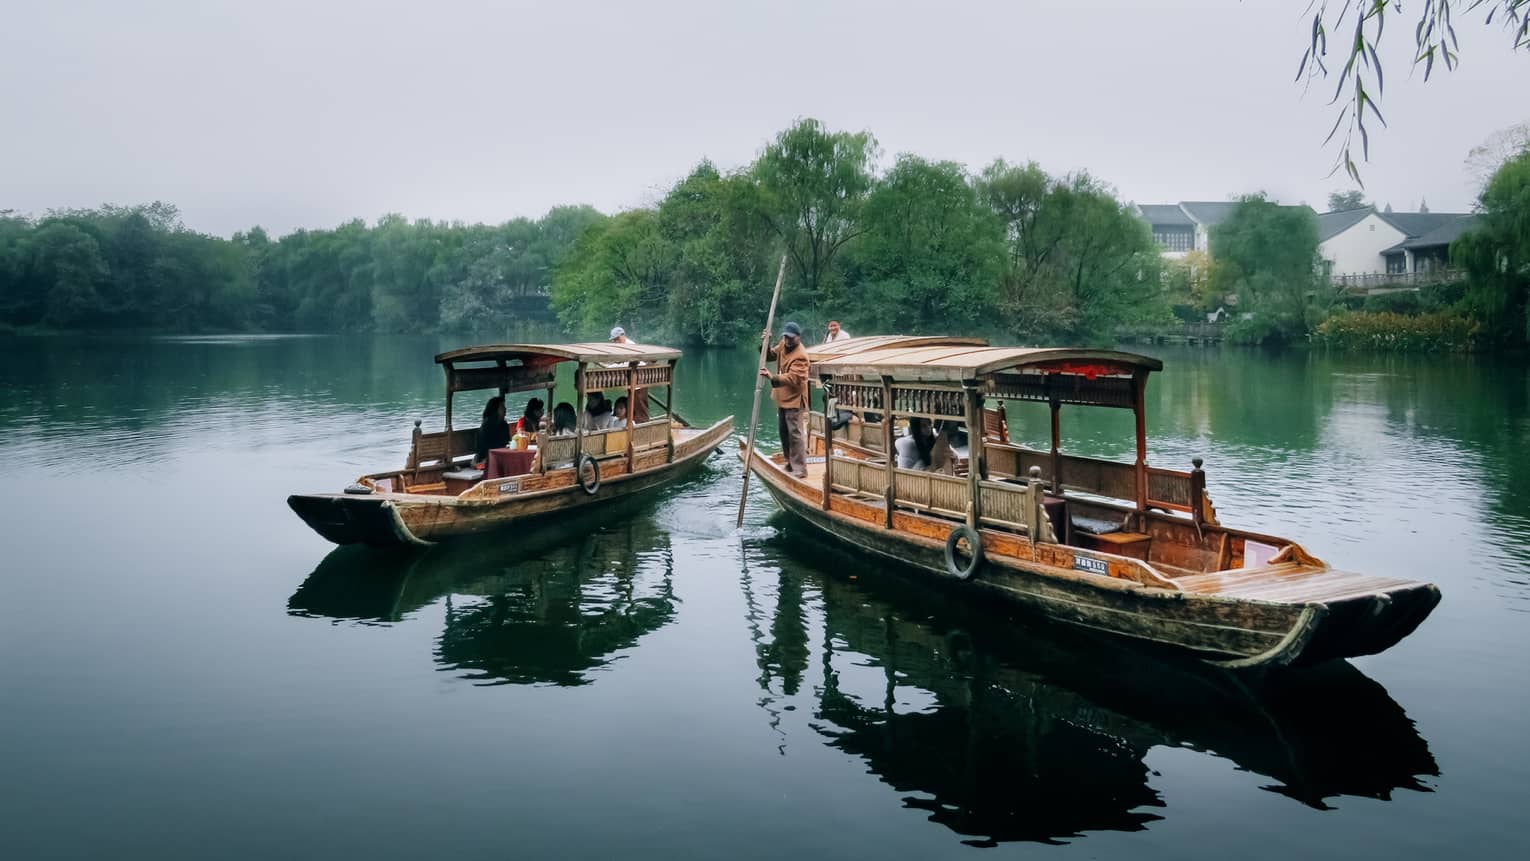 People dine on Chinese wooden rowboat next to boat where man steers with paddle on West Lake